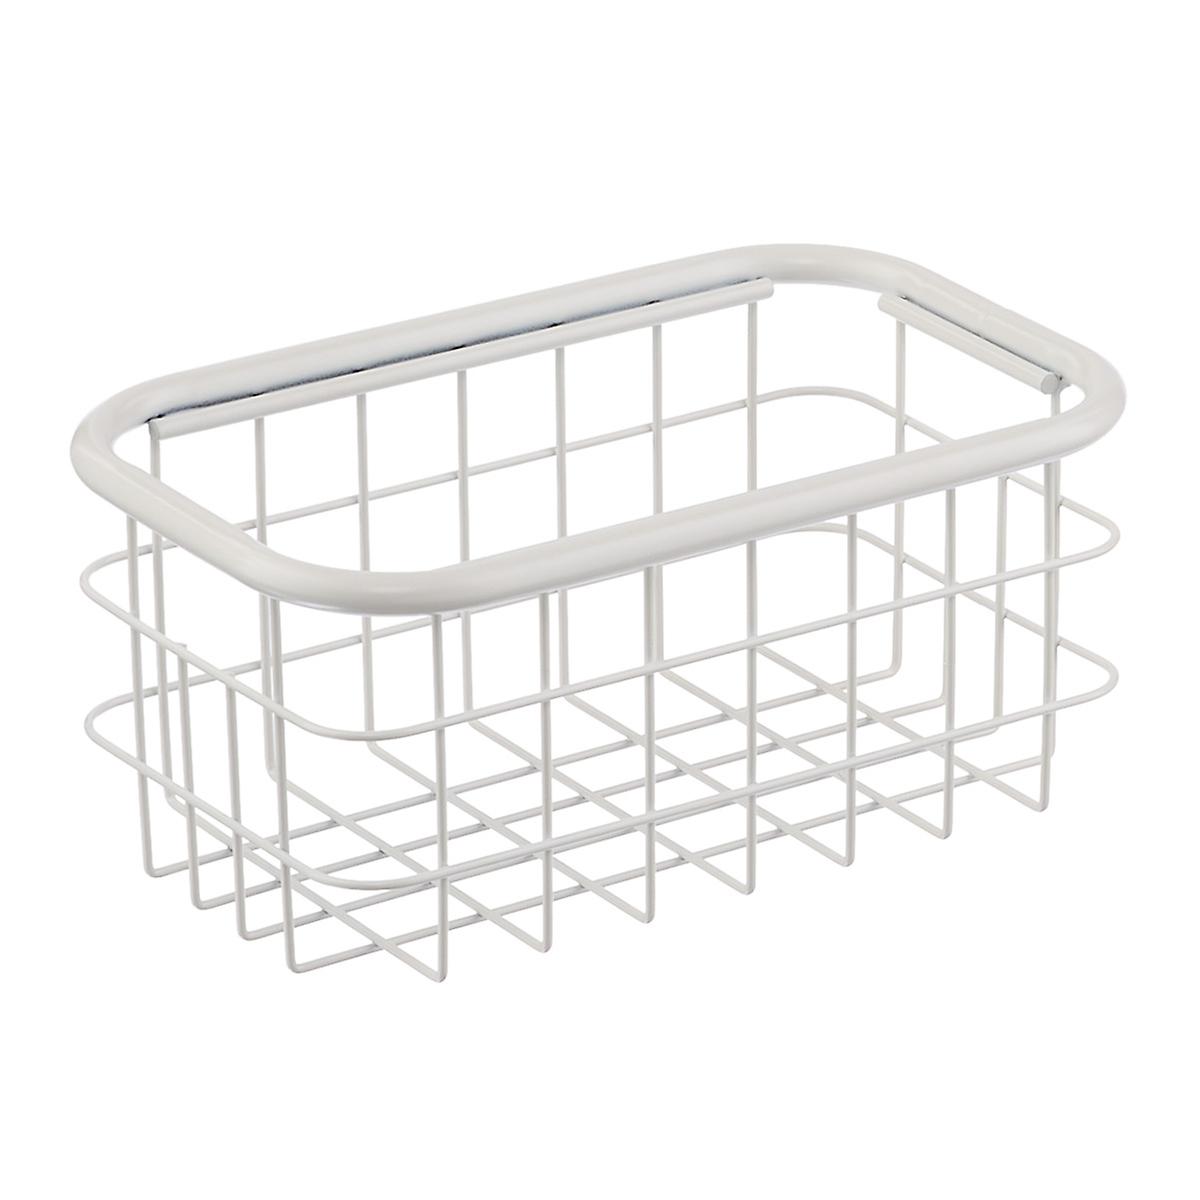 White Urban Stacking Wire Baskets The, Small Stacking Wire Shelves